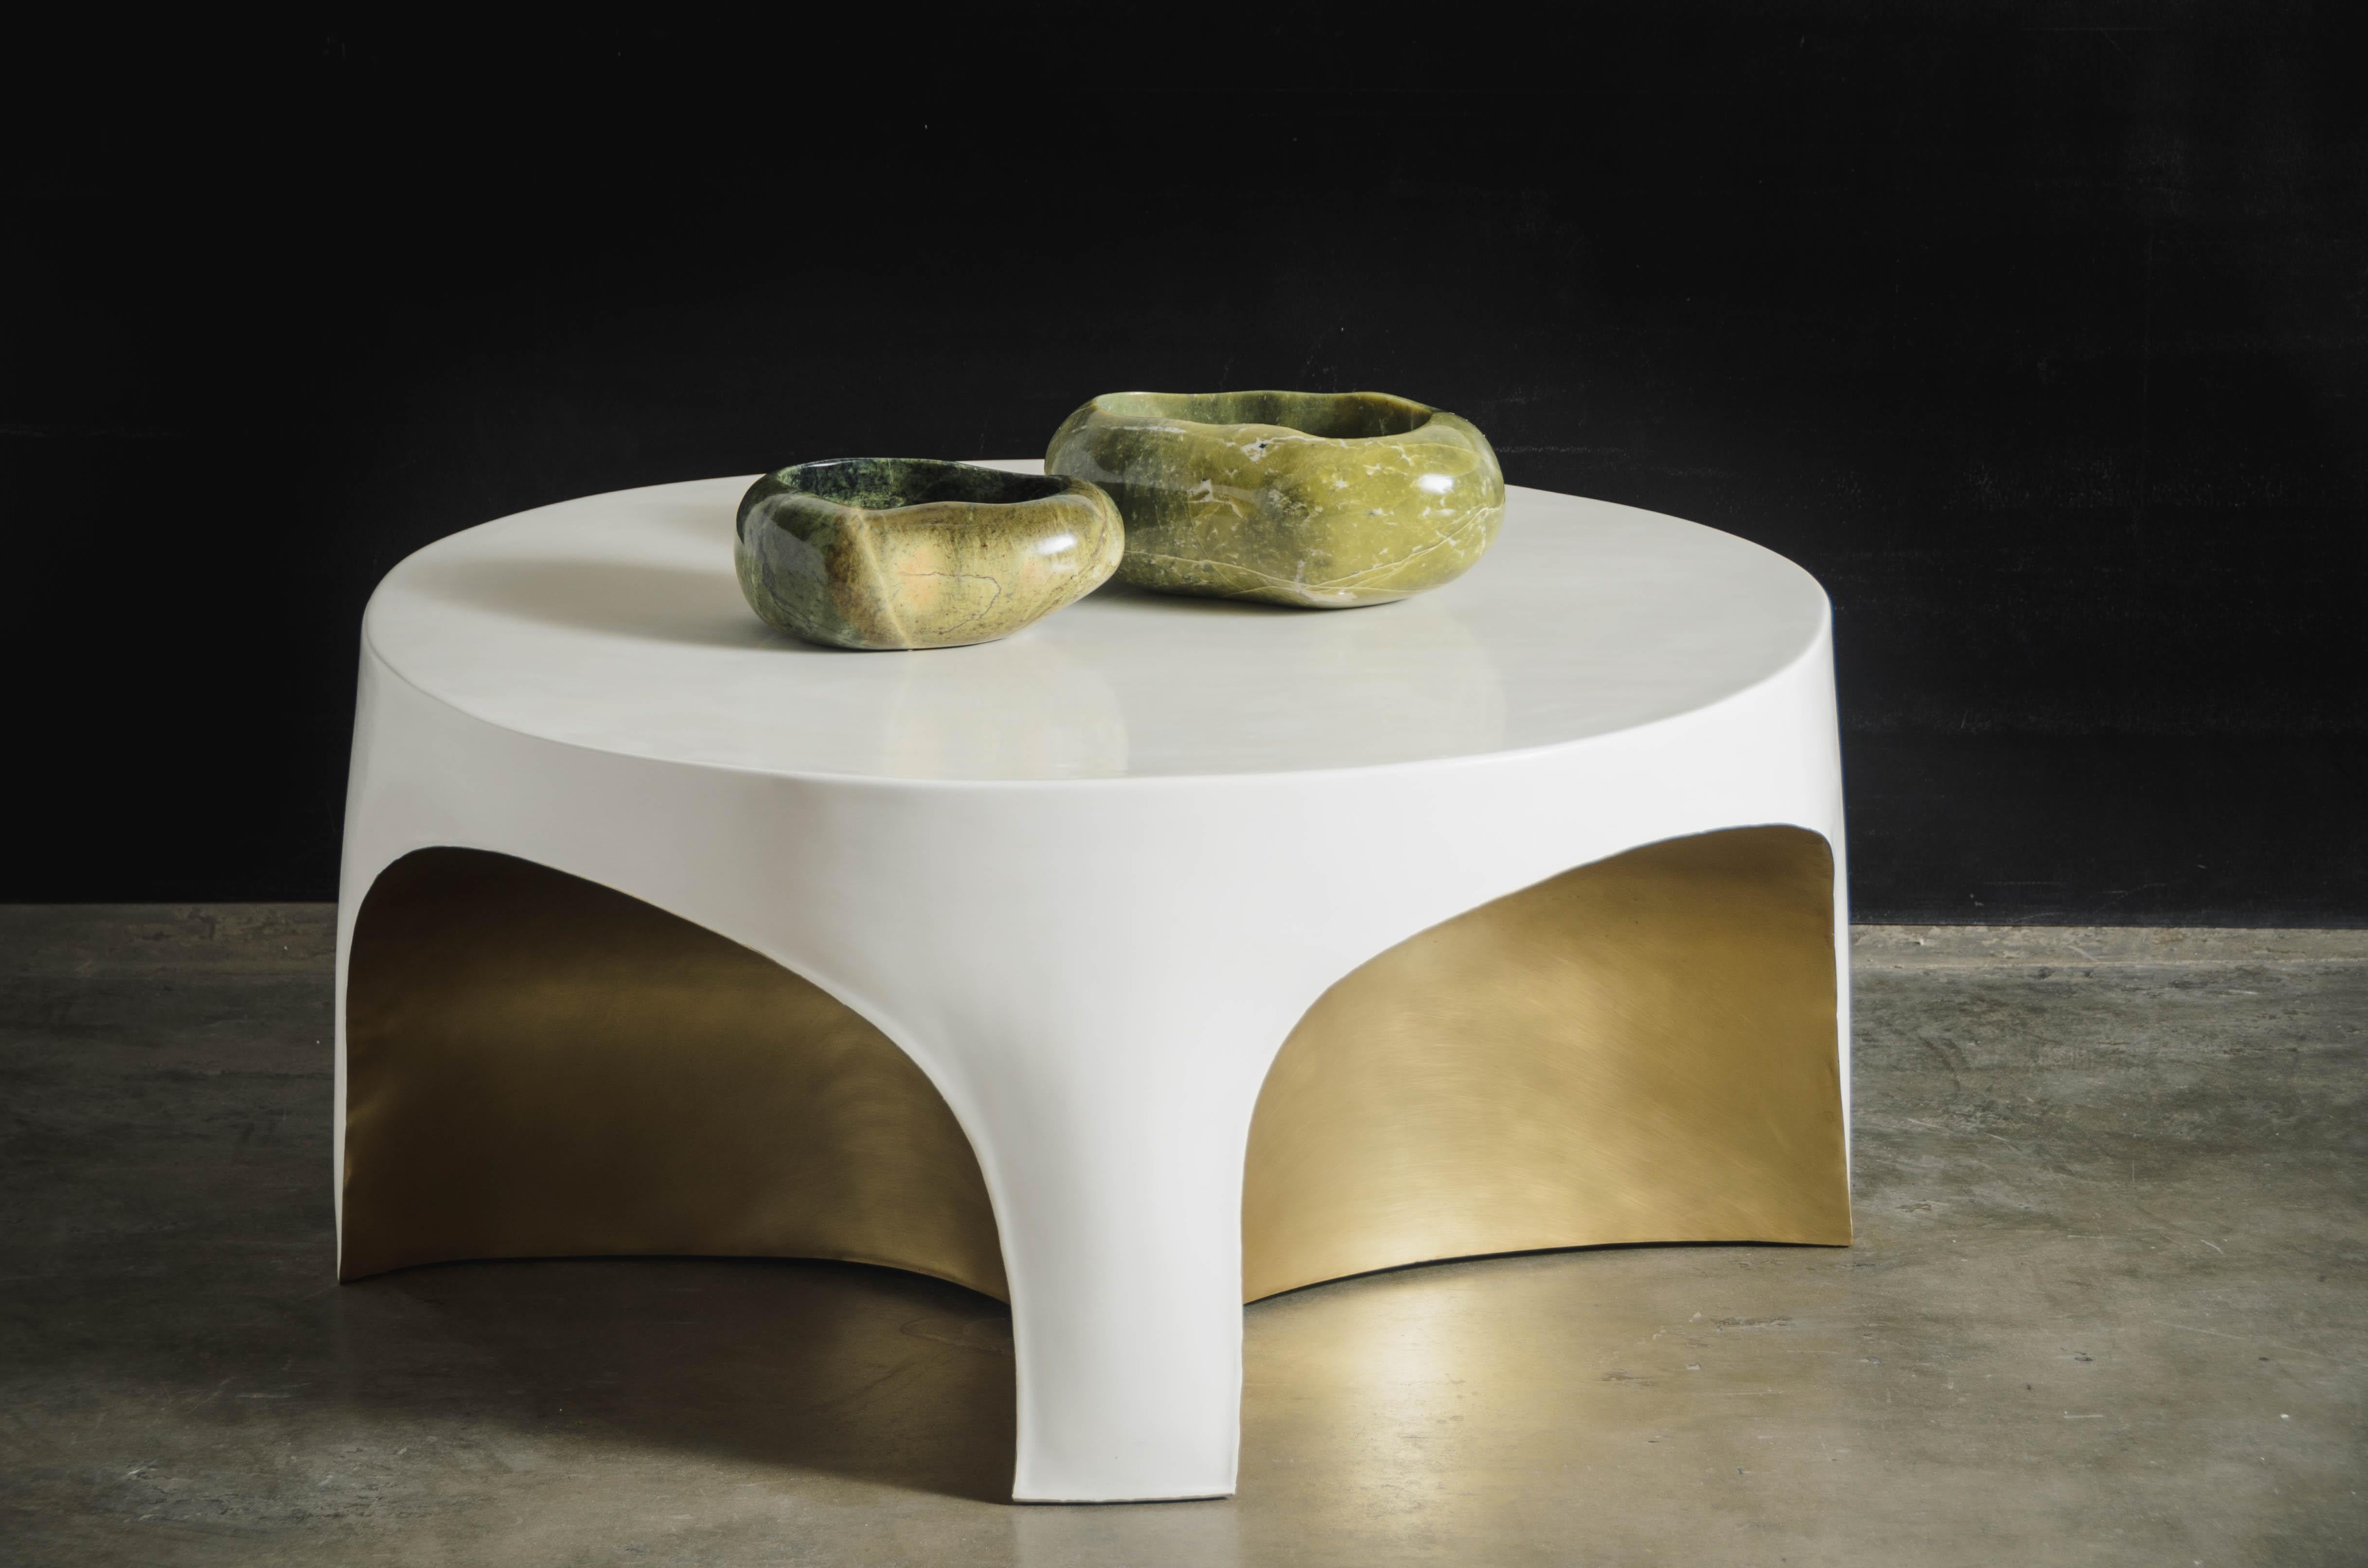 Repoussé Contemporary Brass Rimmed Curved Table w/ Cream Lacquer by Robert Kuo For Sale